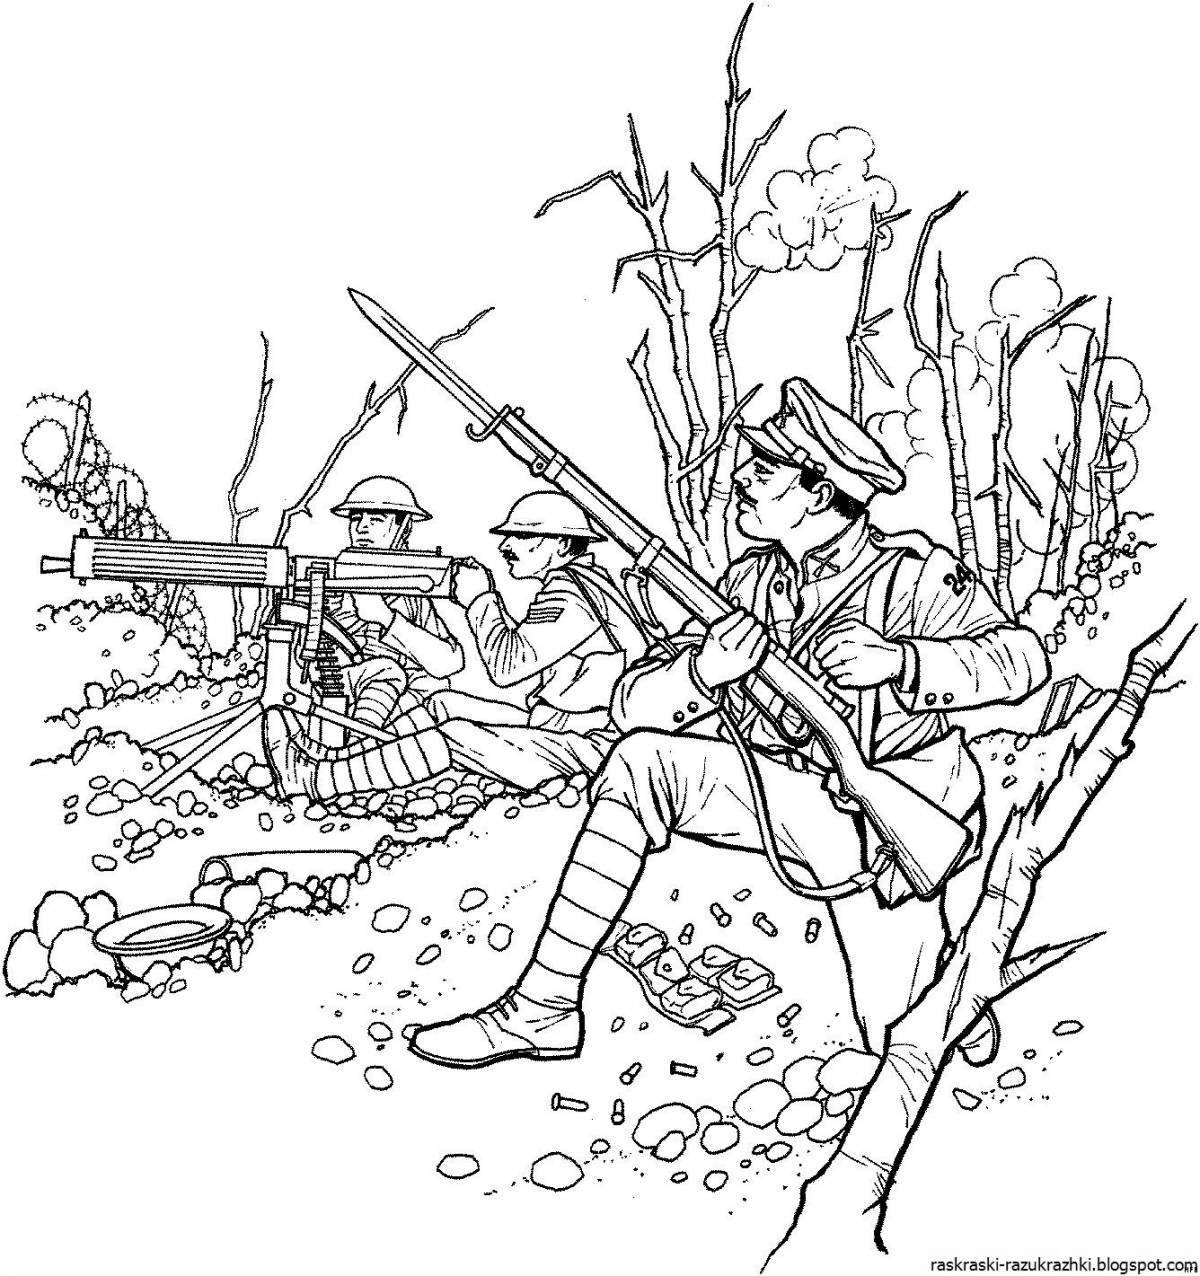 Exciting war coloring book for preschoolers